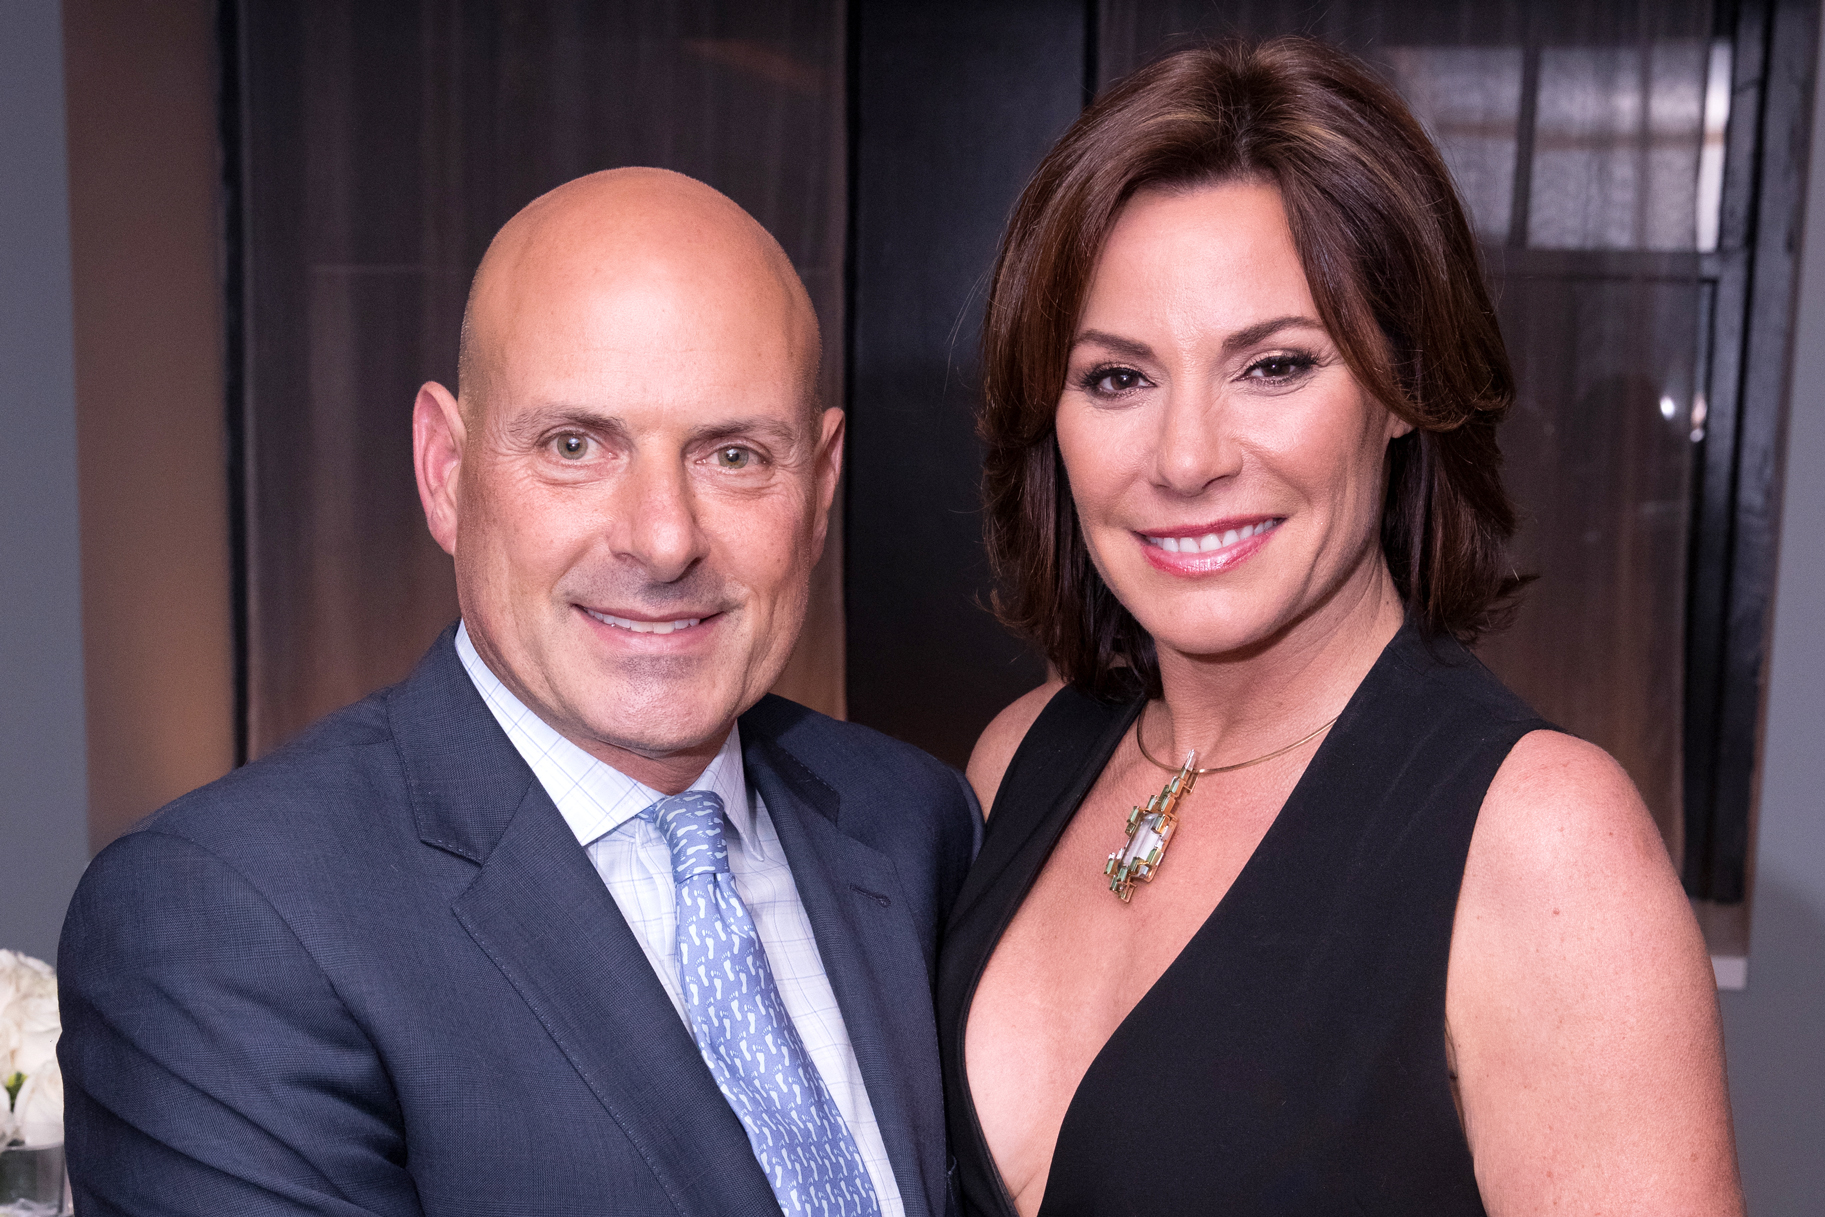 RHONY’s Luann De Lesseps Reacts To Ex-Husband’s Tom D’Agostino’s Engagement!